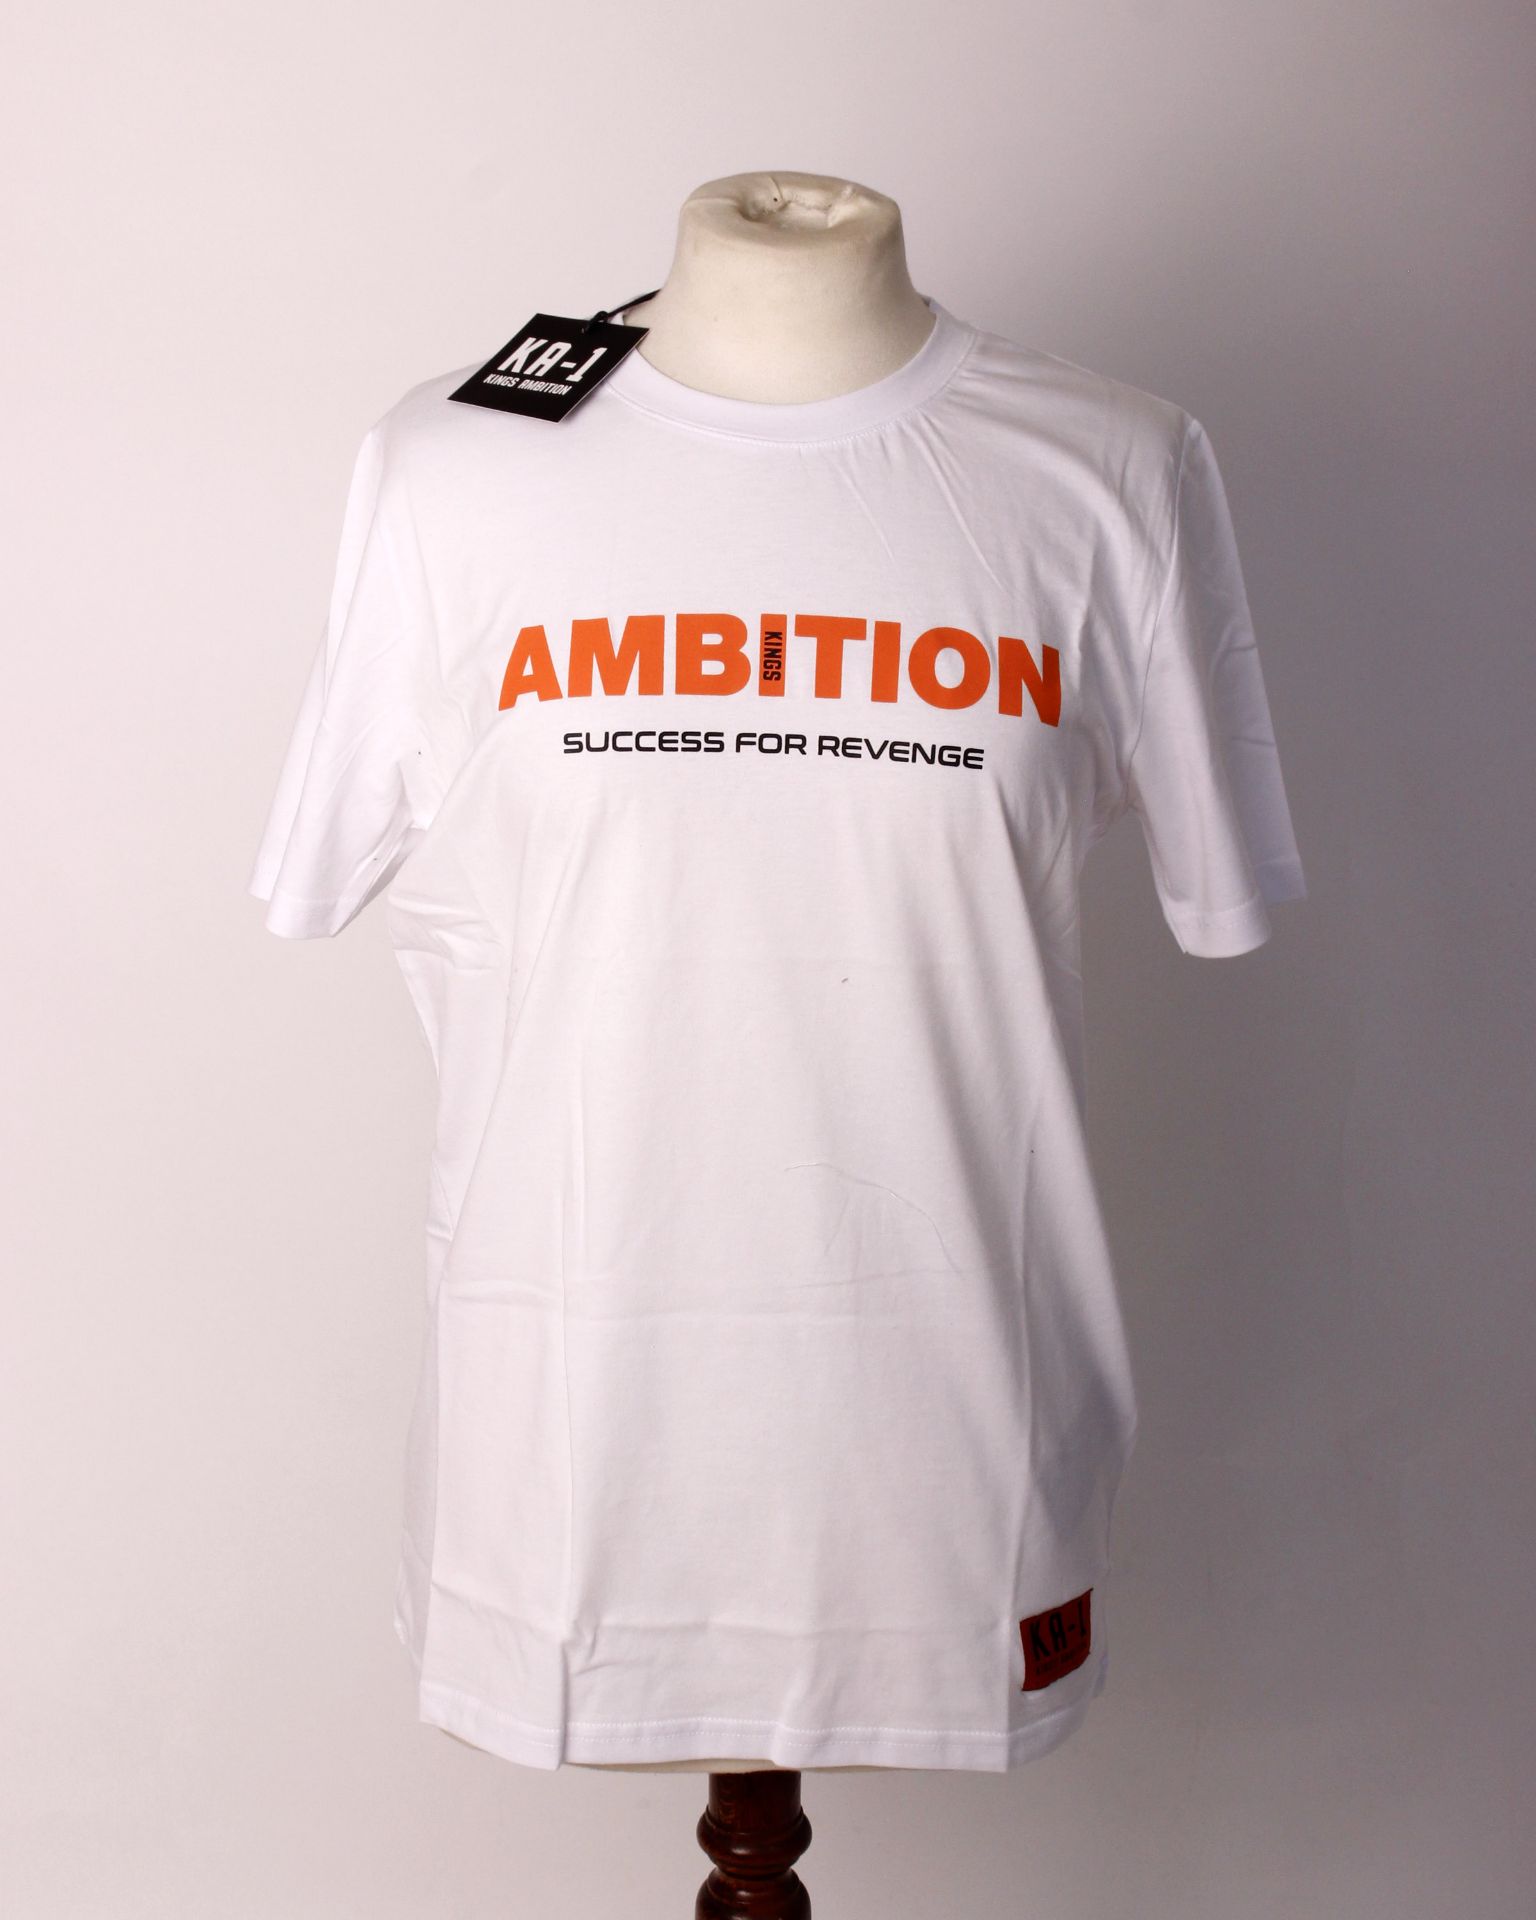 One man's as new Kings Ambition KA-1 t-shirt in white (XS, KW20-10). - Image 2 of 6